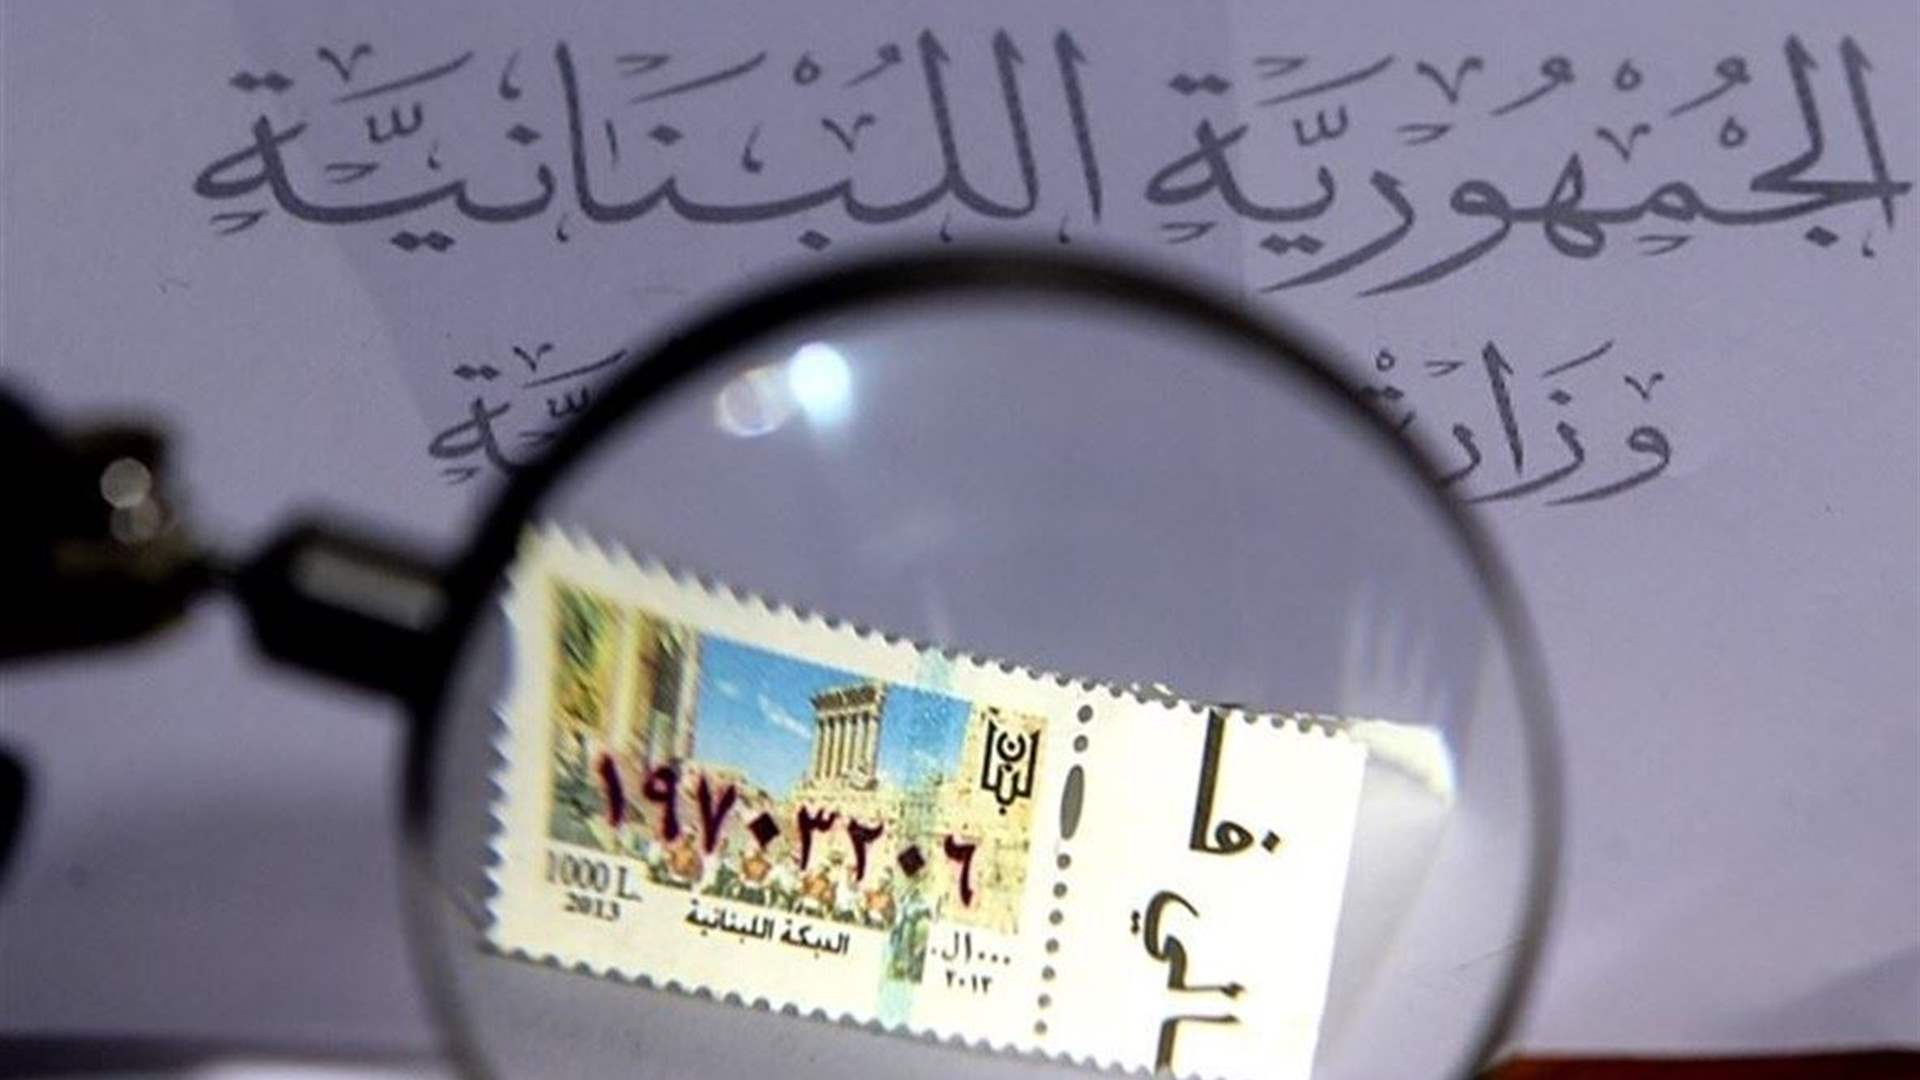 The sale of $3 million stamps at $36 million: Combating the black market stamp trade heats up